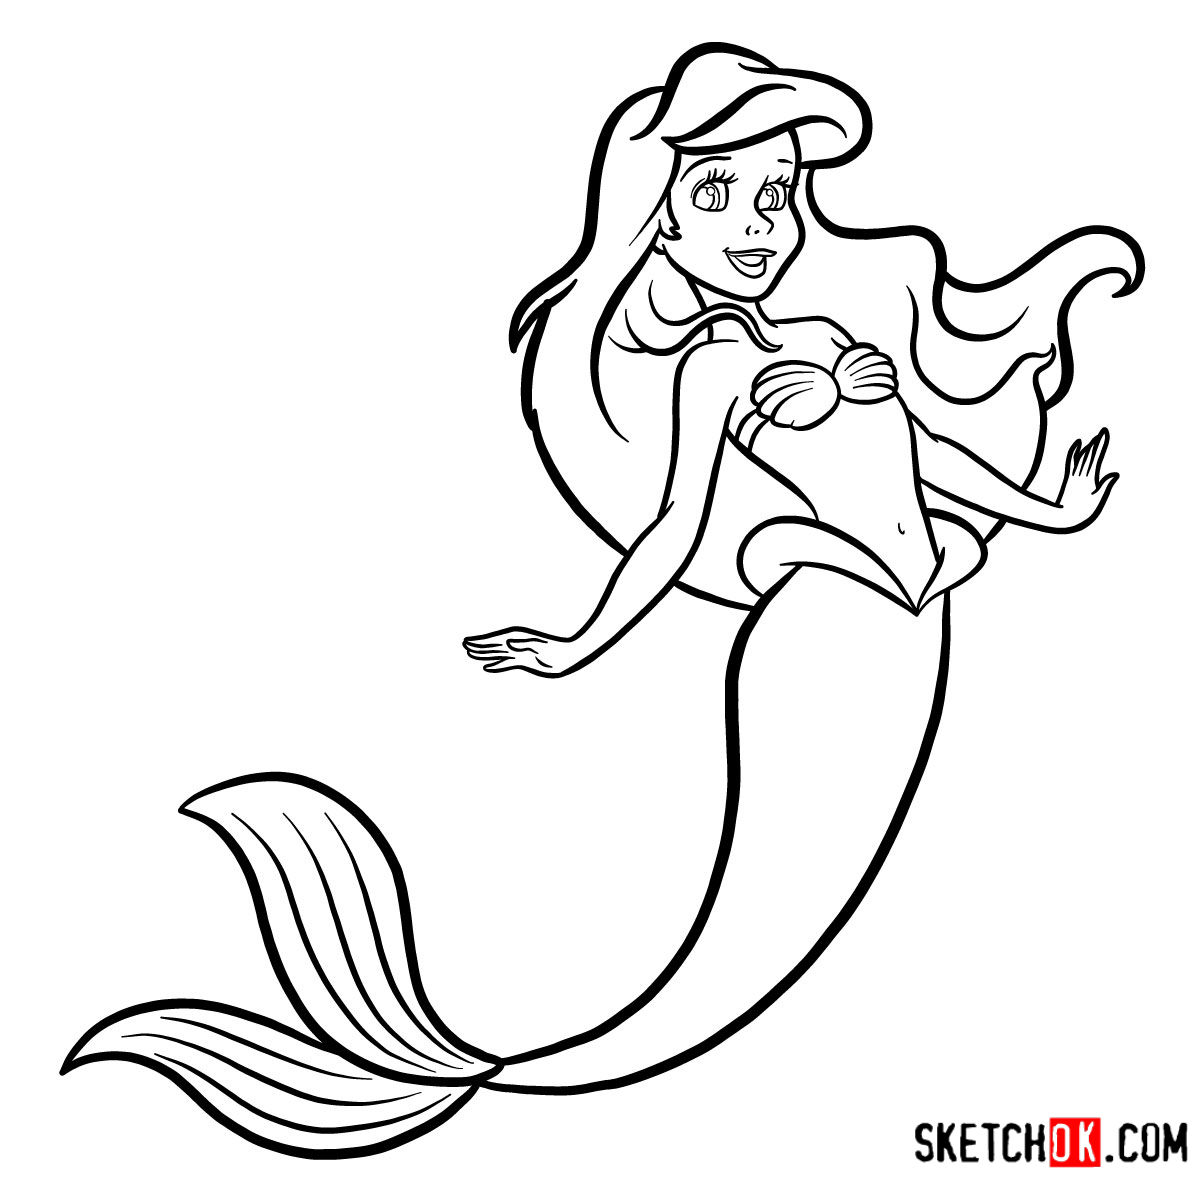 How to draw cute Ariel | The Little Mermaid